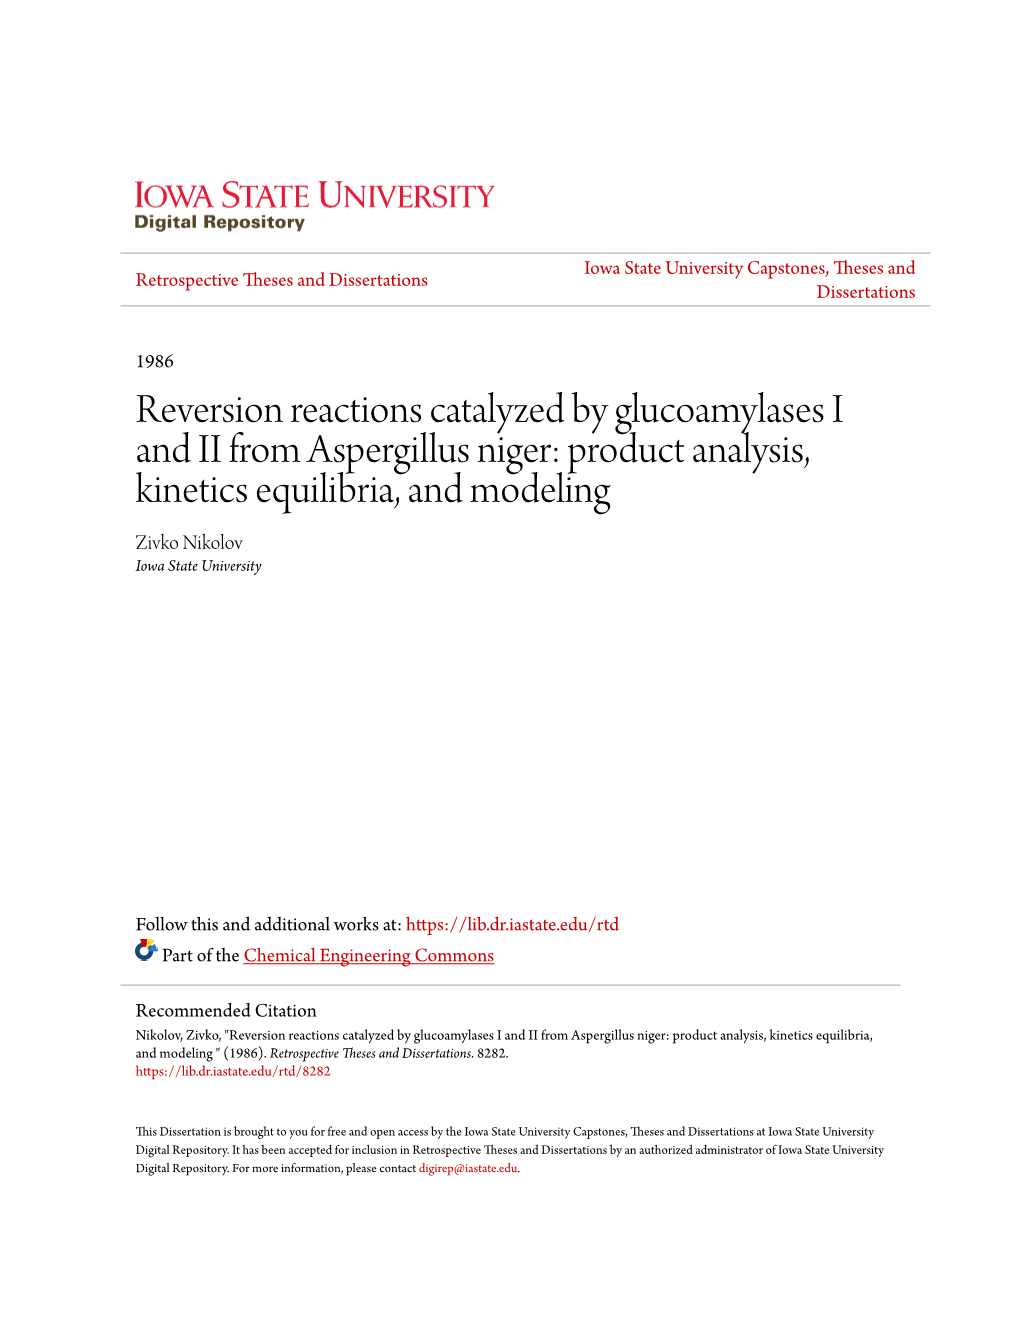 Reversion Reactions Catalyzed by Glucoamylases I and II From